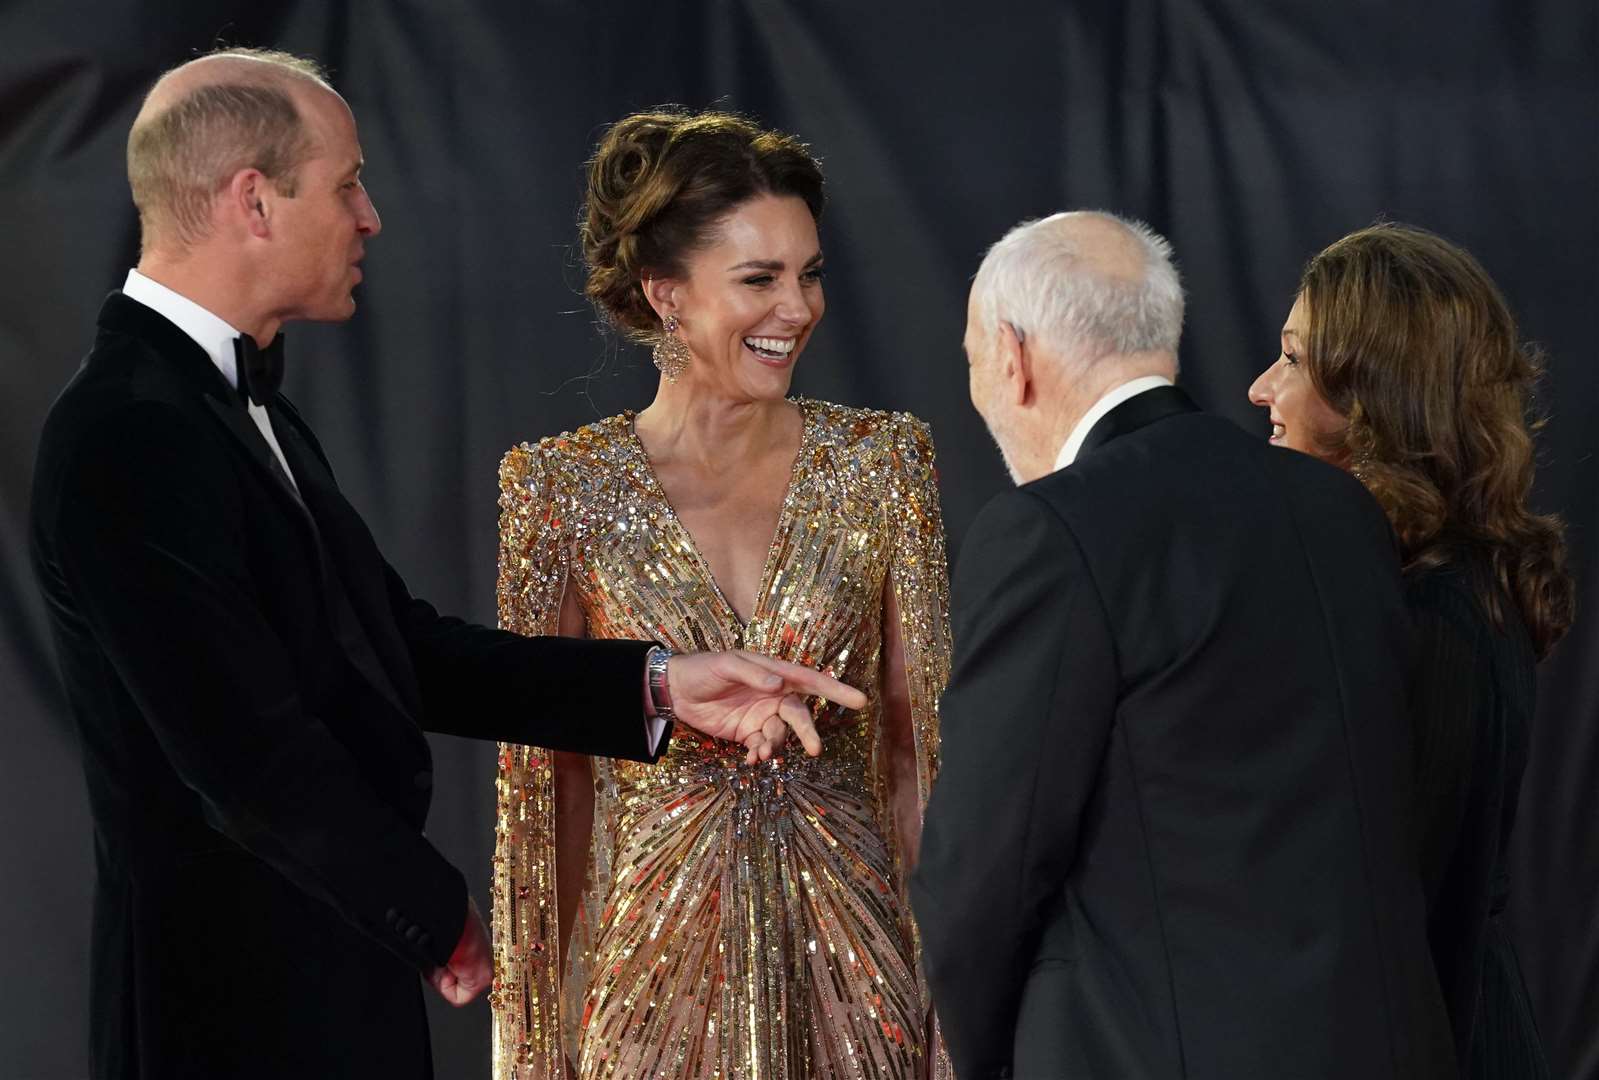 The Duke and Duchess of Cambridge are greeted by Bond producers Barbara Broccoli and Michael G Wilson (Broccoli/PA)